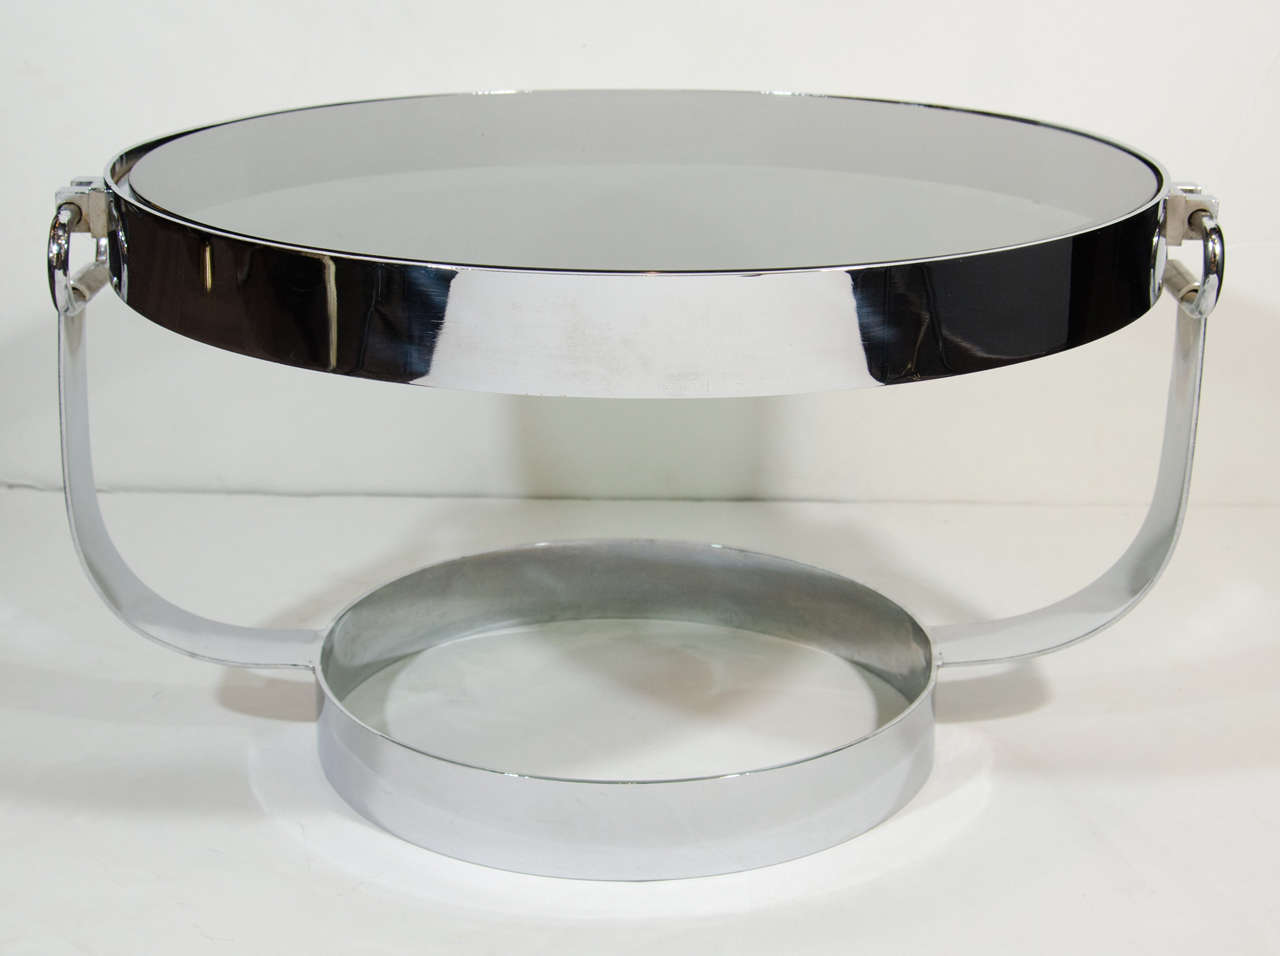 Vintage circular coffee table or side table in polished chrome steel with smoked grey glass top.  The table features a round base with 